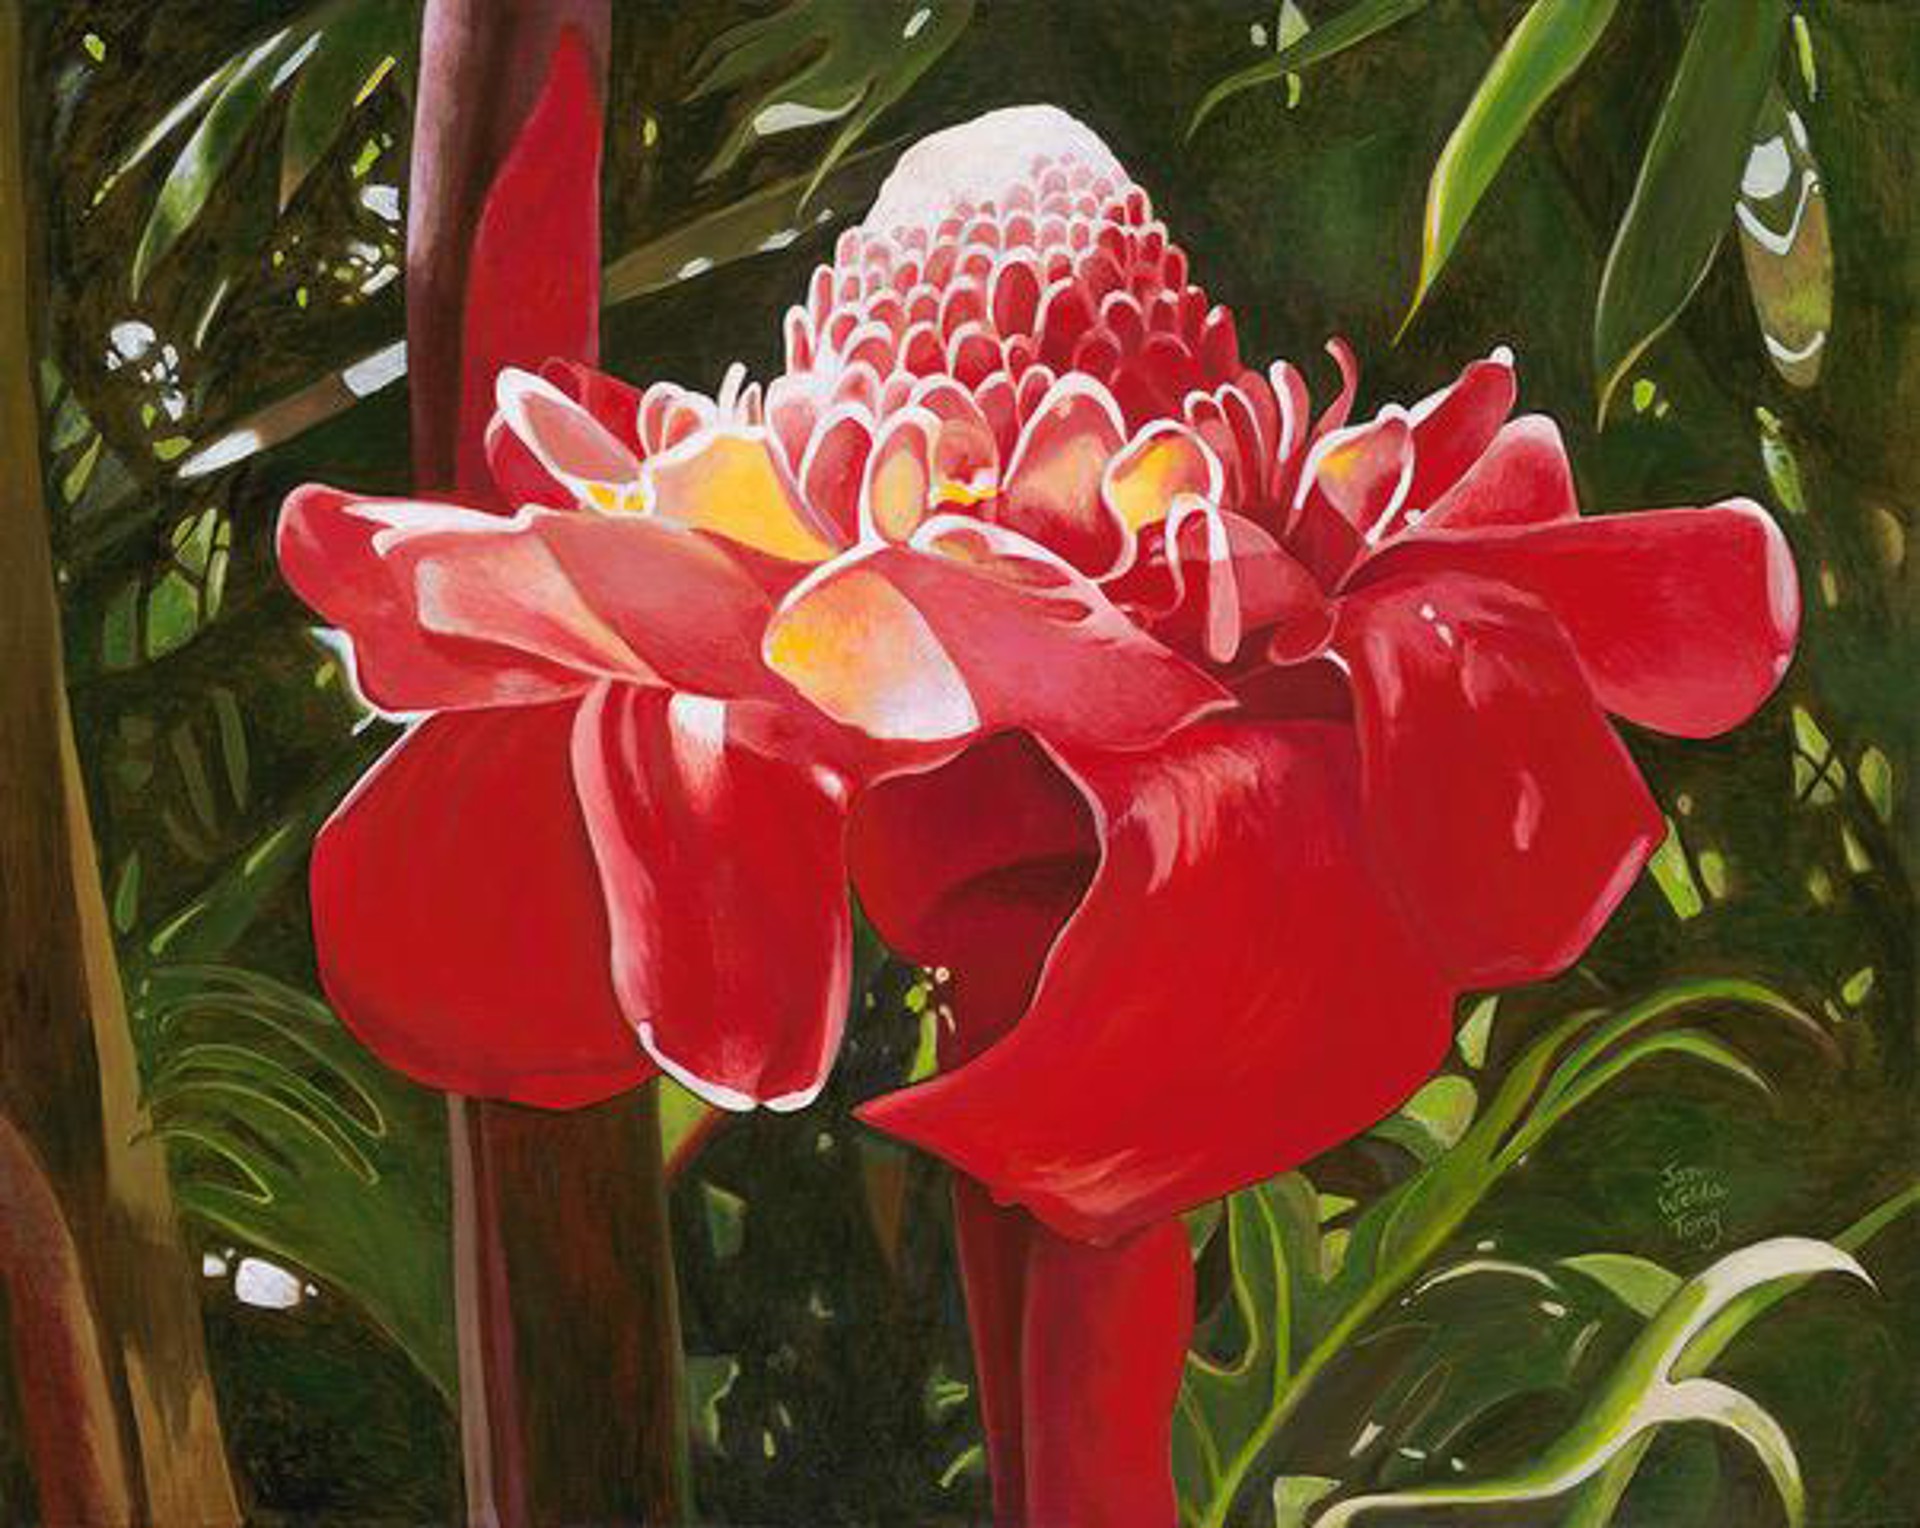 Torch Ginger by Jan Welda Tong